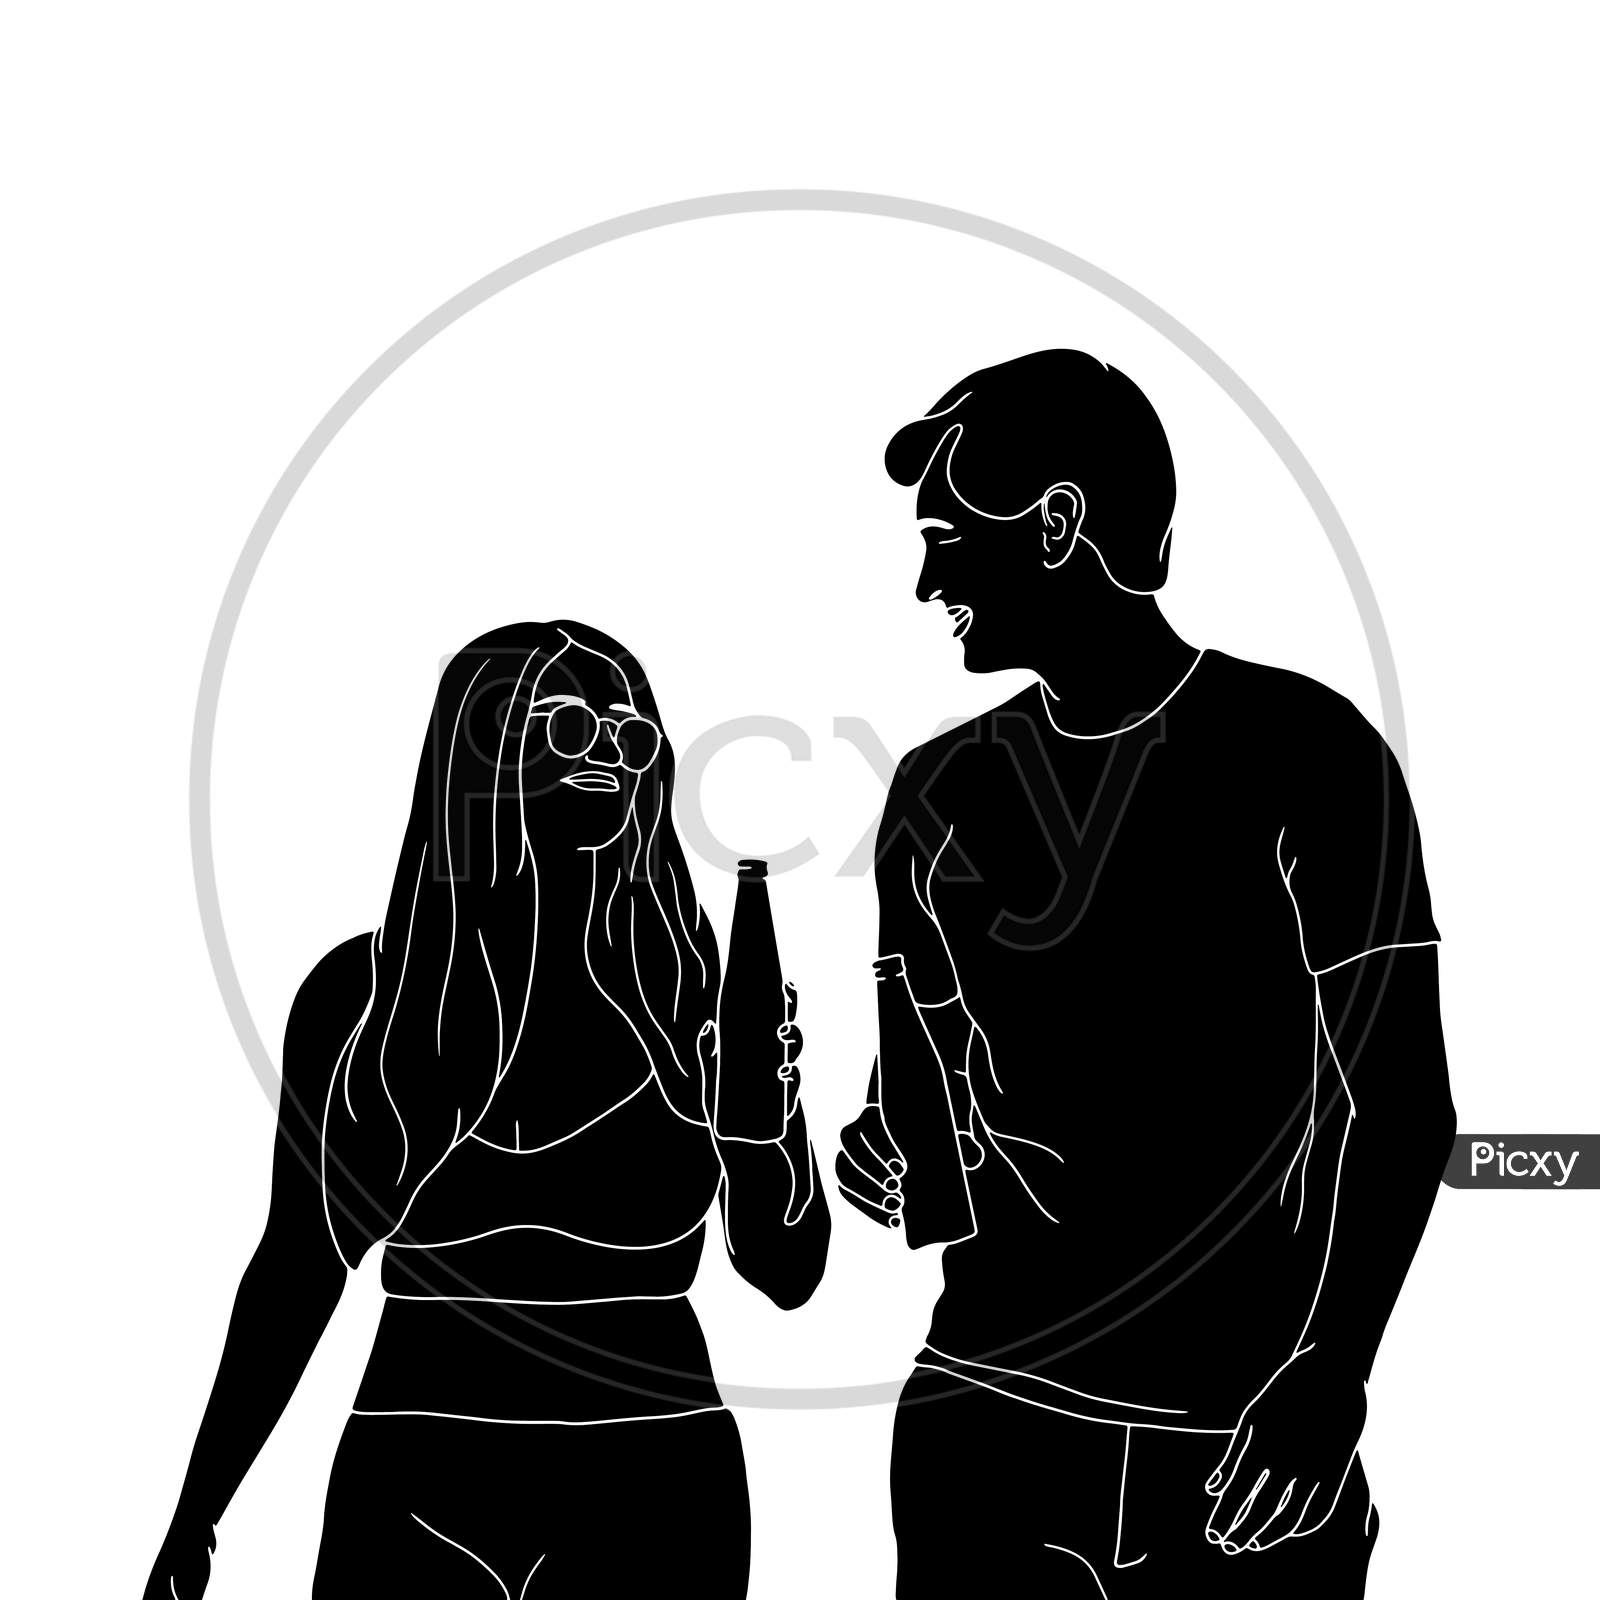 Couple Walking With A Beer Bottle Or Cold Drink, The Silhouette Of People For Friendship Day. Hand-Drawn Character Illustration Of Happy People.